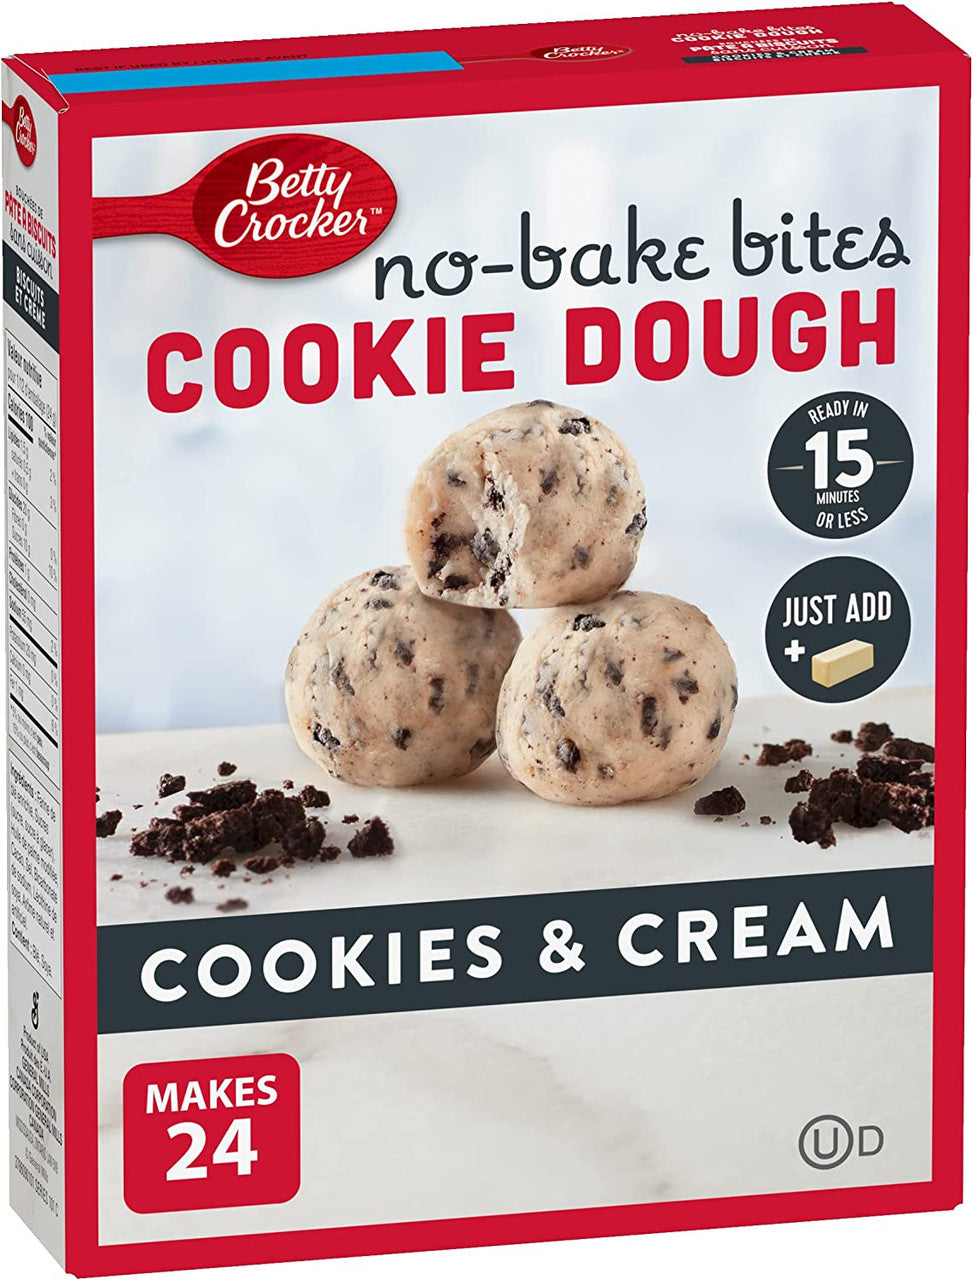 Betty Crocker No-Bake Cookie Dough Bites Mix, Cookies & Cream Flavor, 292g/10.2 oz. Box {Imported from Canada}